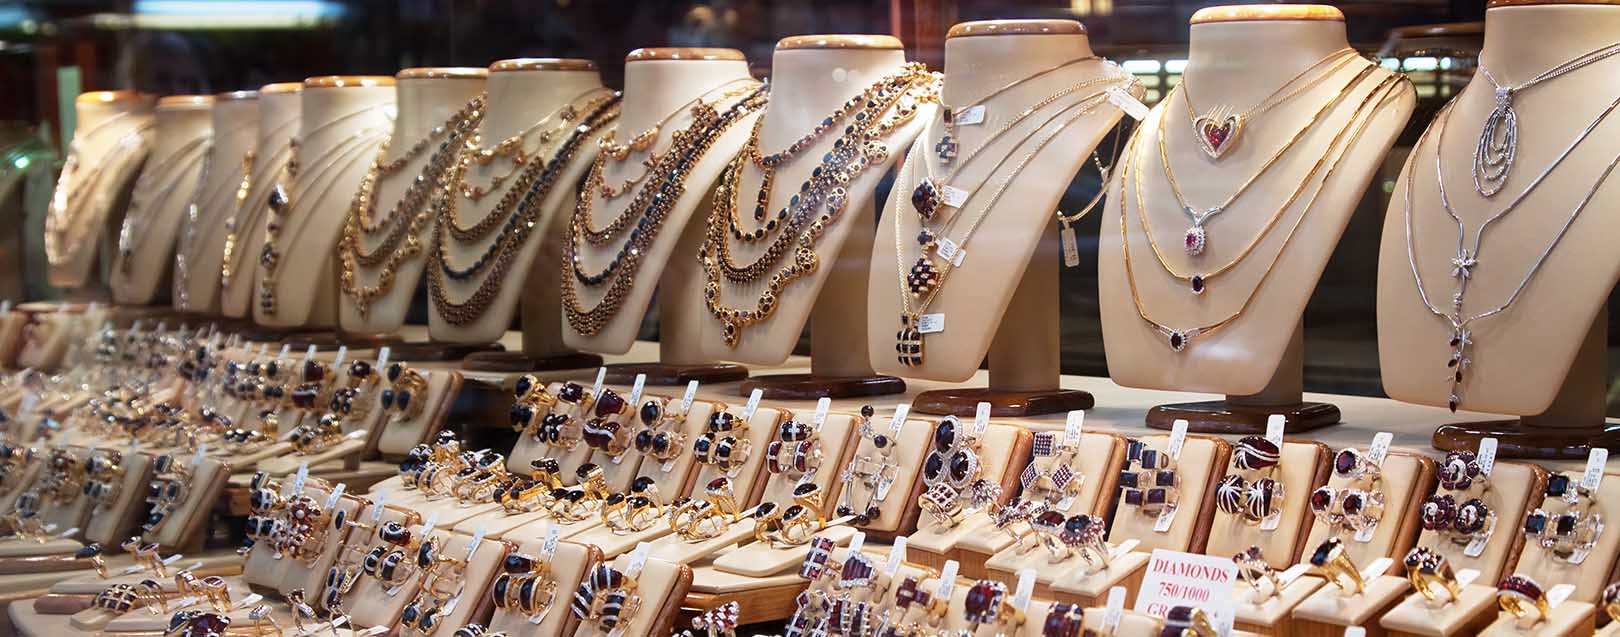 India’s silver jewellery exports jump 4-fold